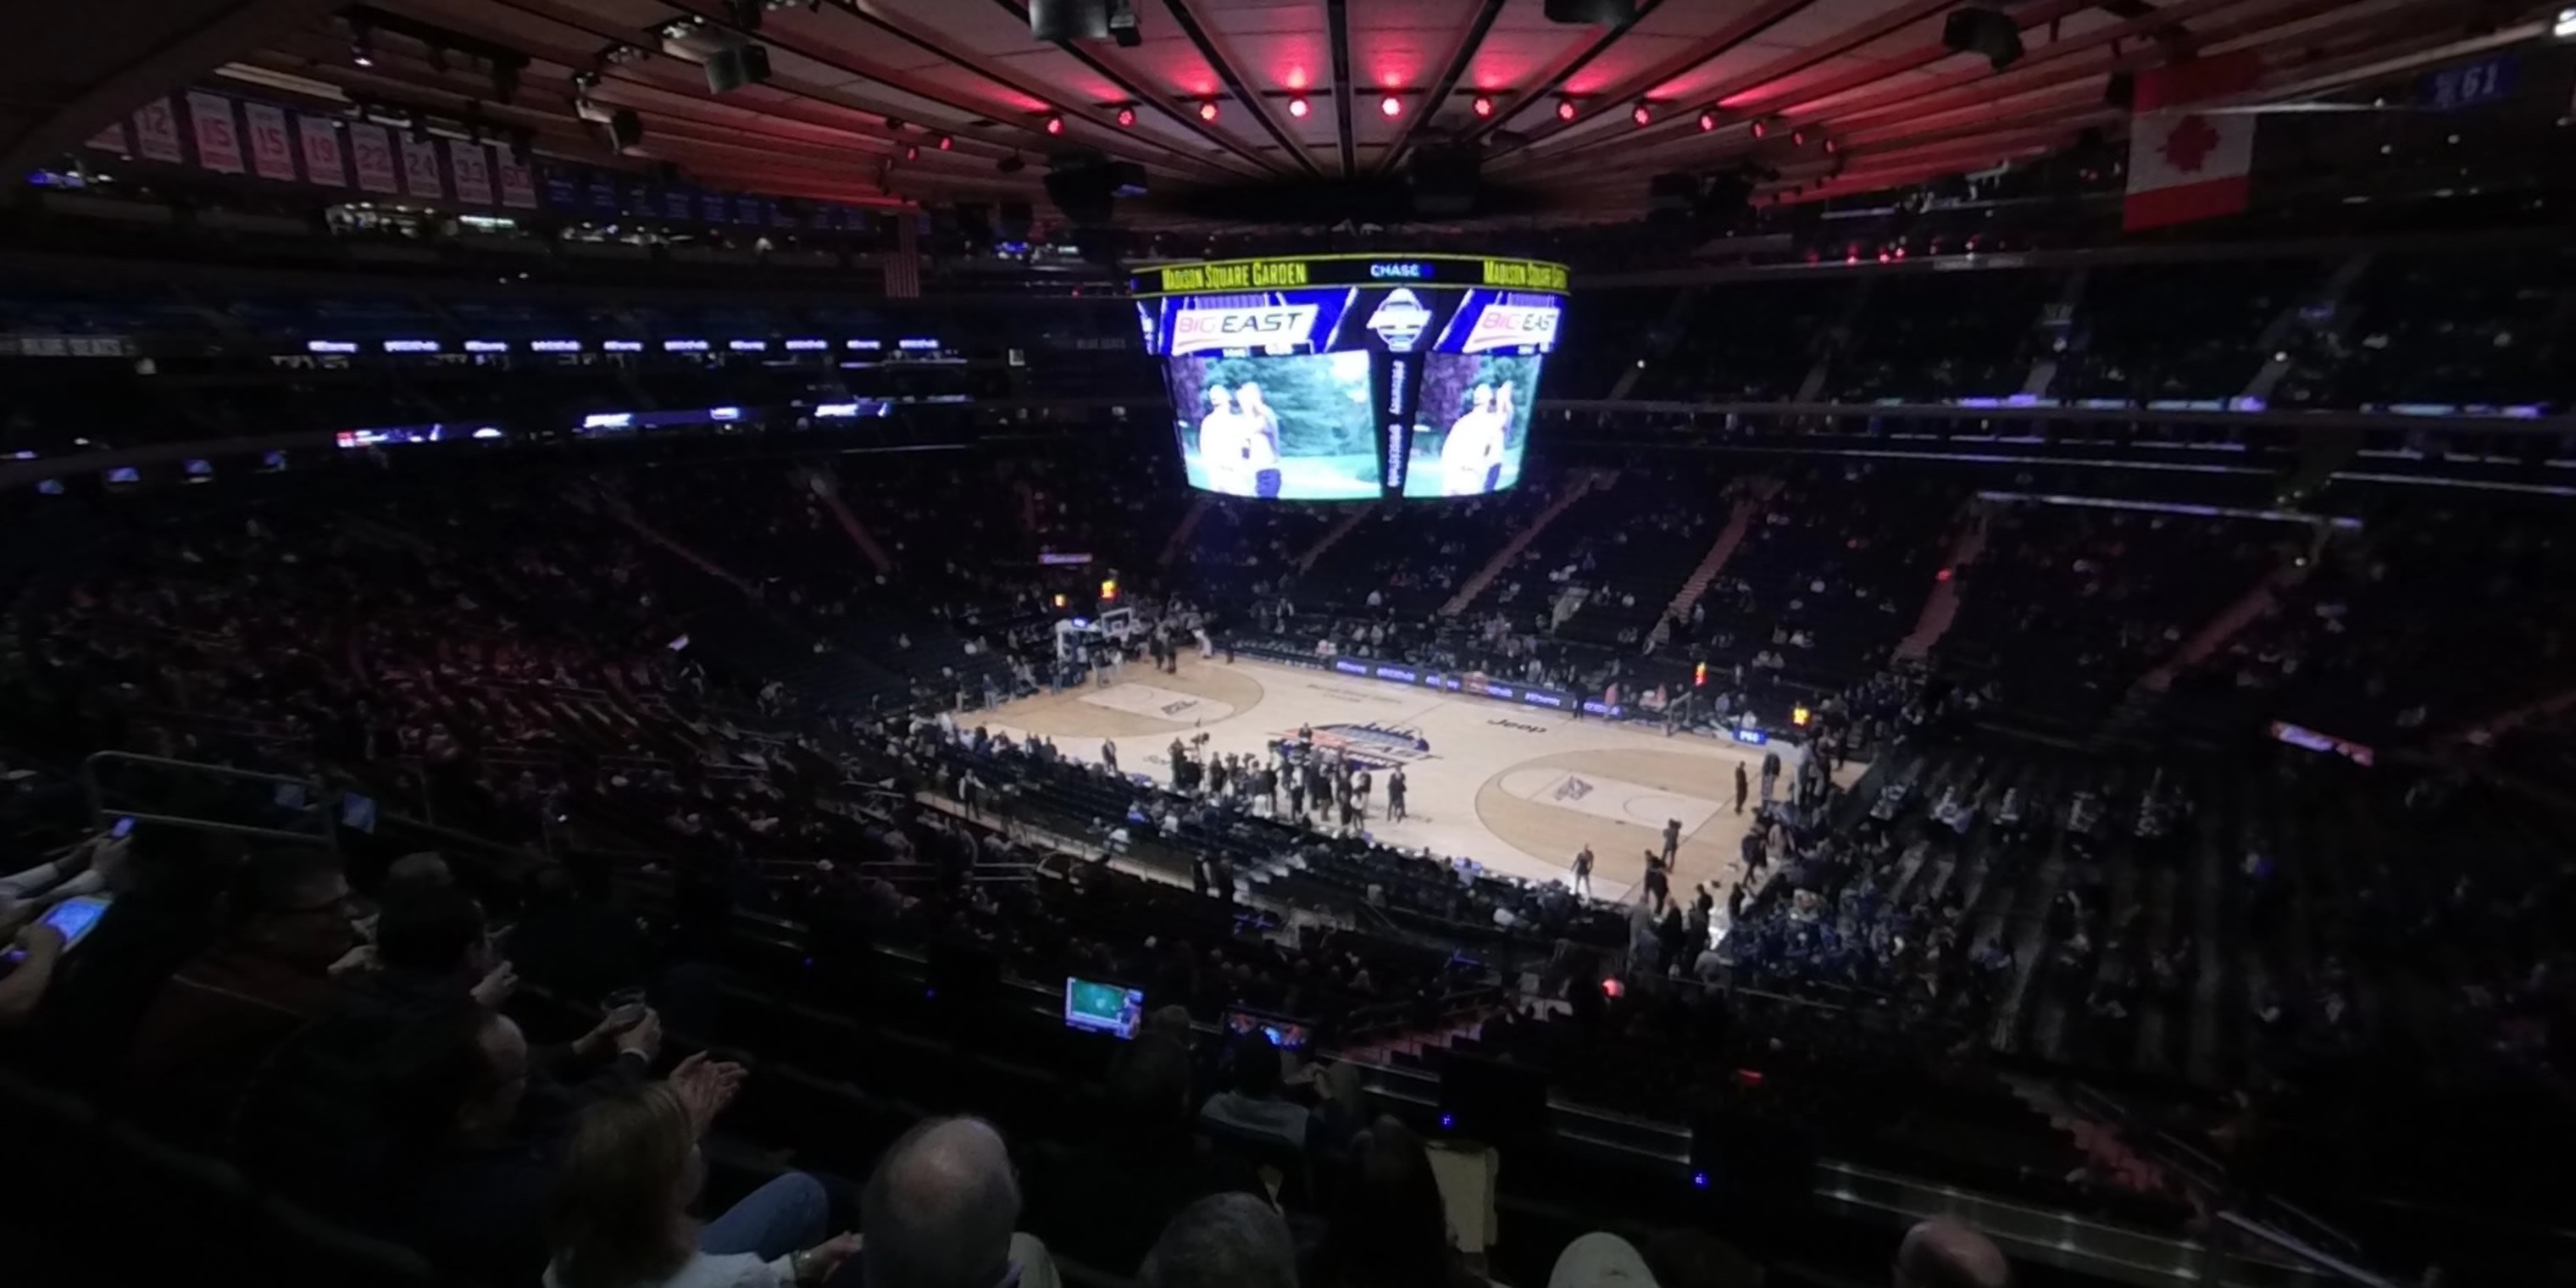 section 226 panoramic seat view  for basketball - madison square garden